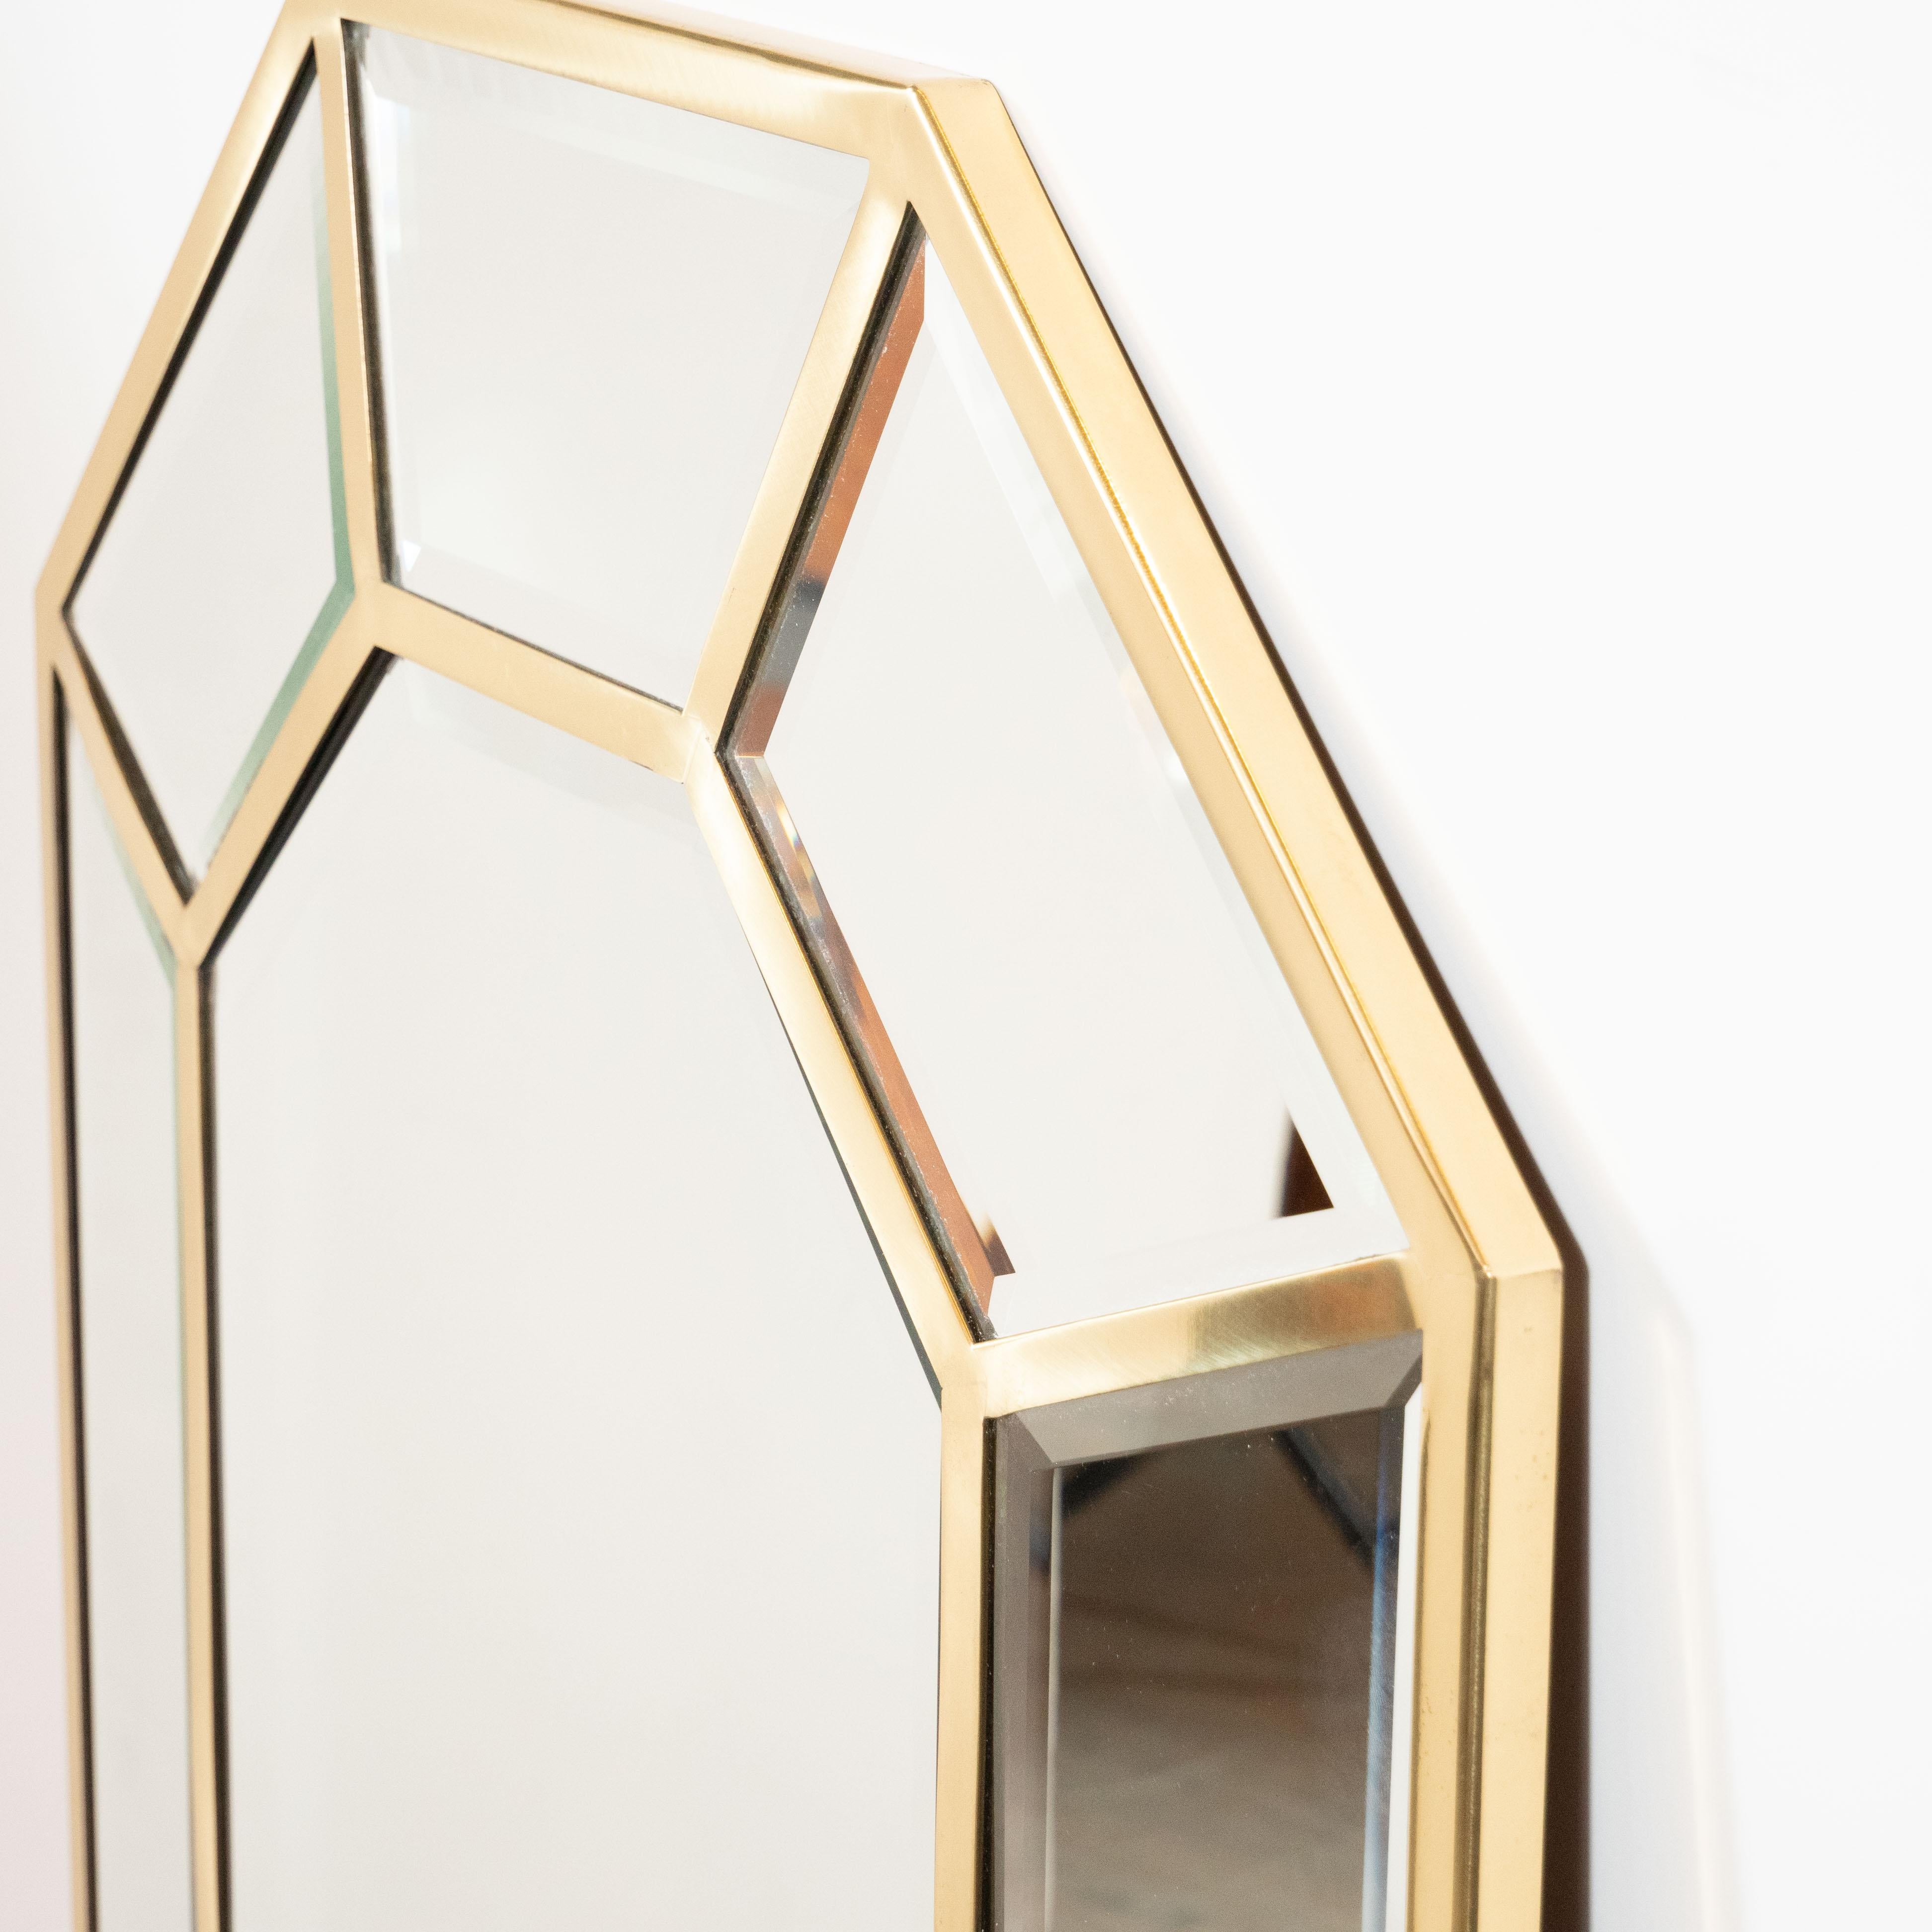 Late 20th Century Mid-Century Modern Segmented Octagonal Polished Brass Mirror For Sale